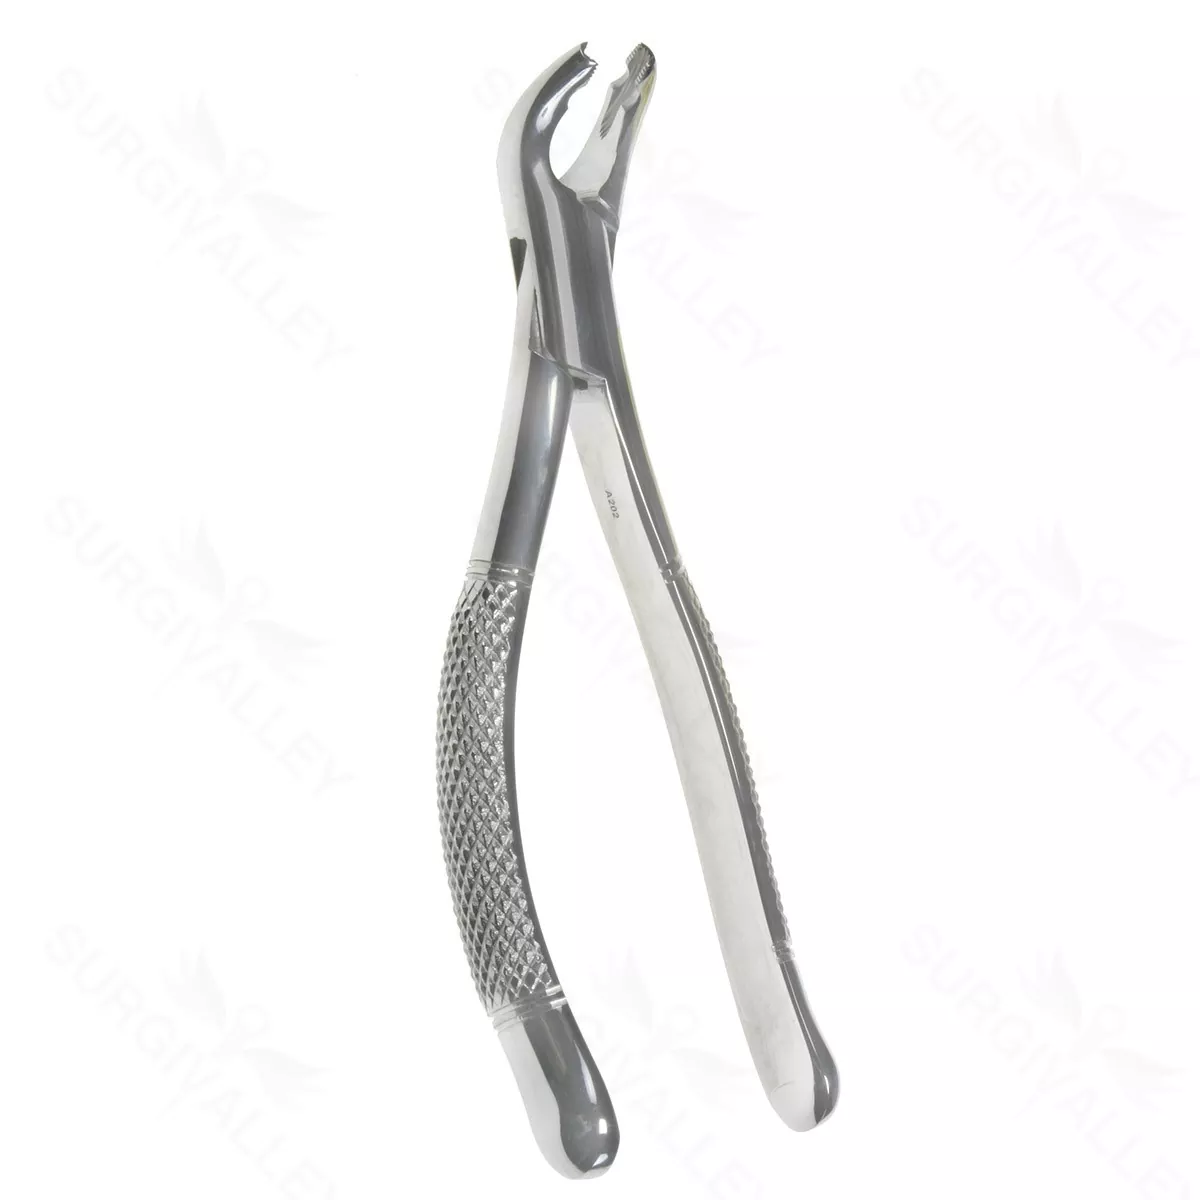 Oral Molar Forceps – Lower Anterior #151AS